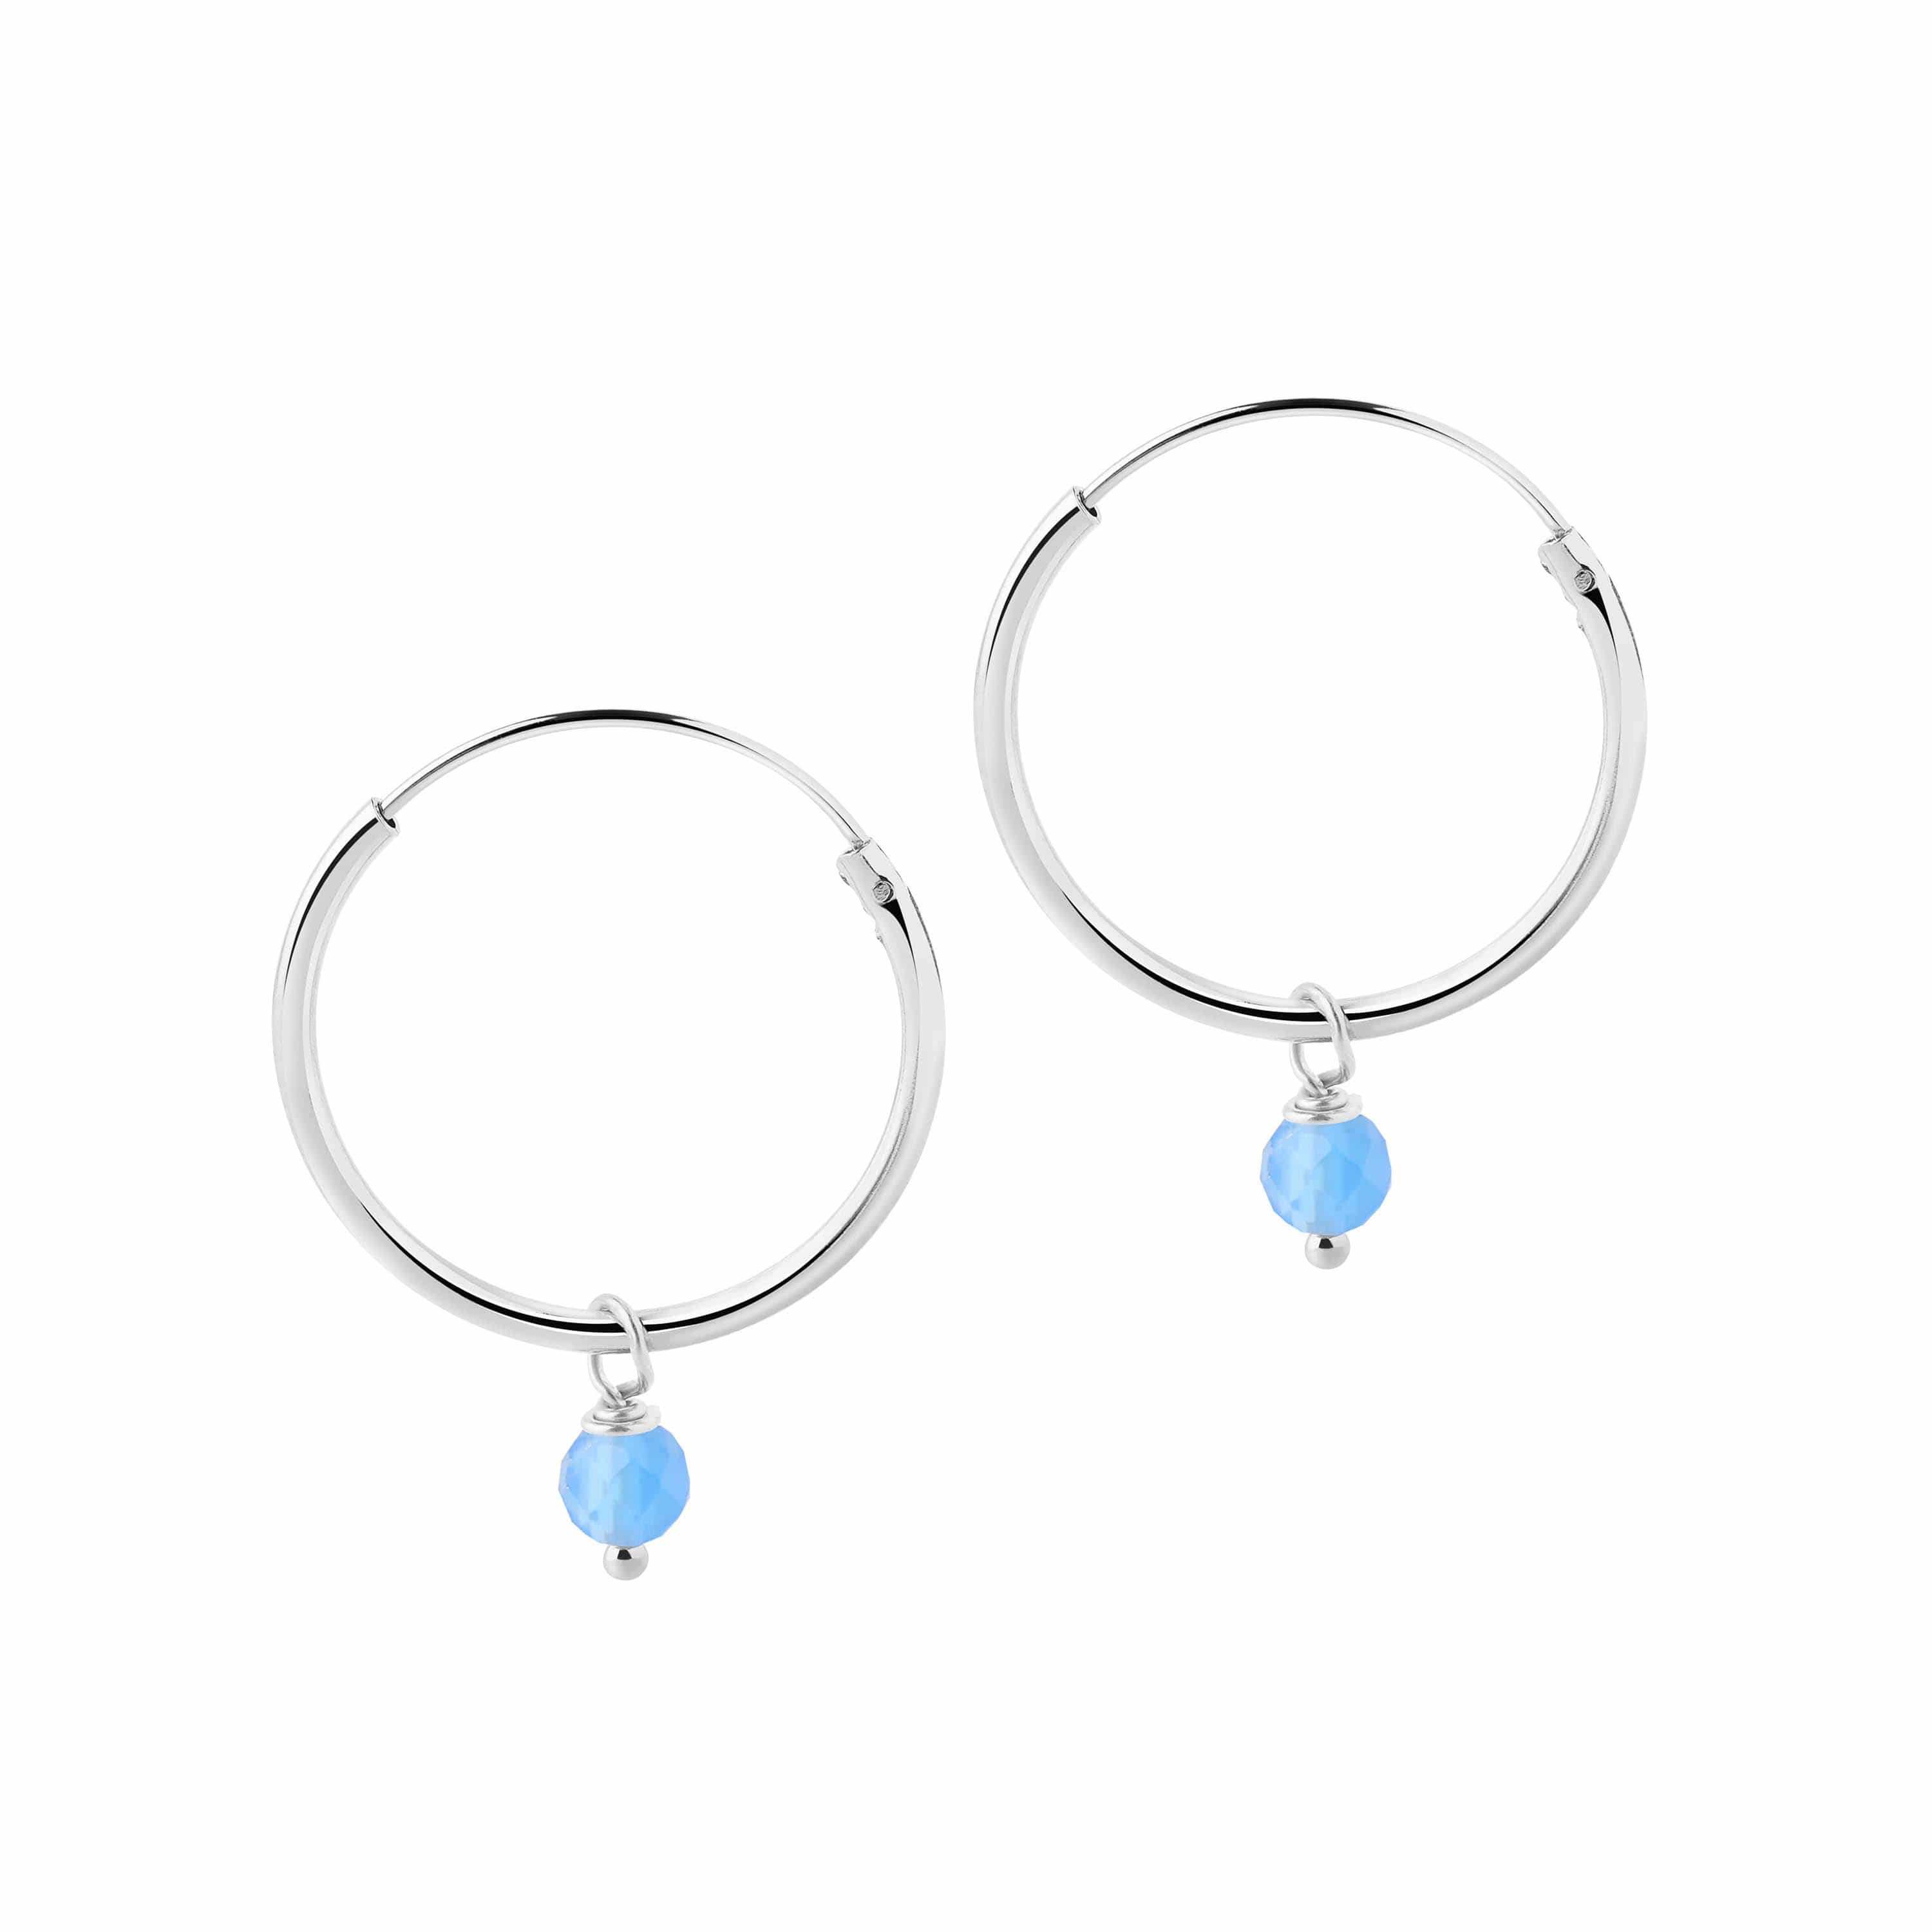 Gold Plated Hoop Earrings with Blue Stone